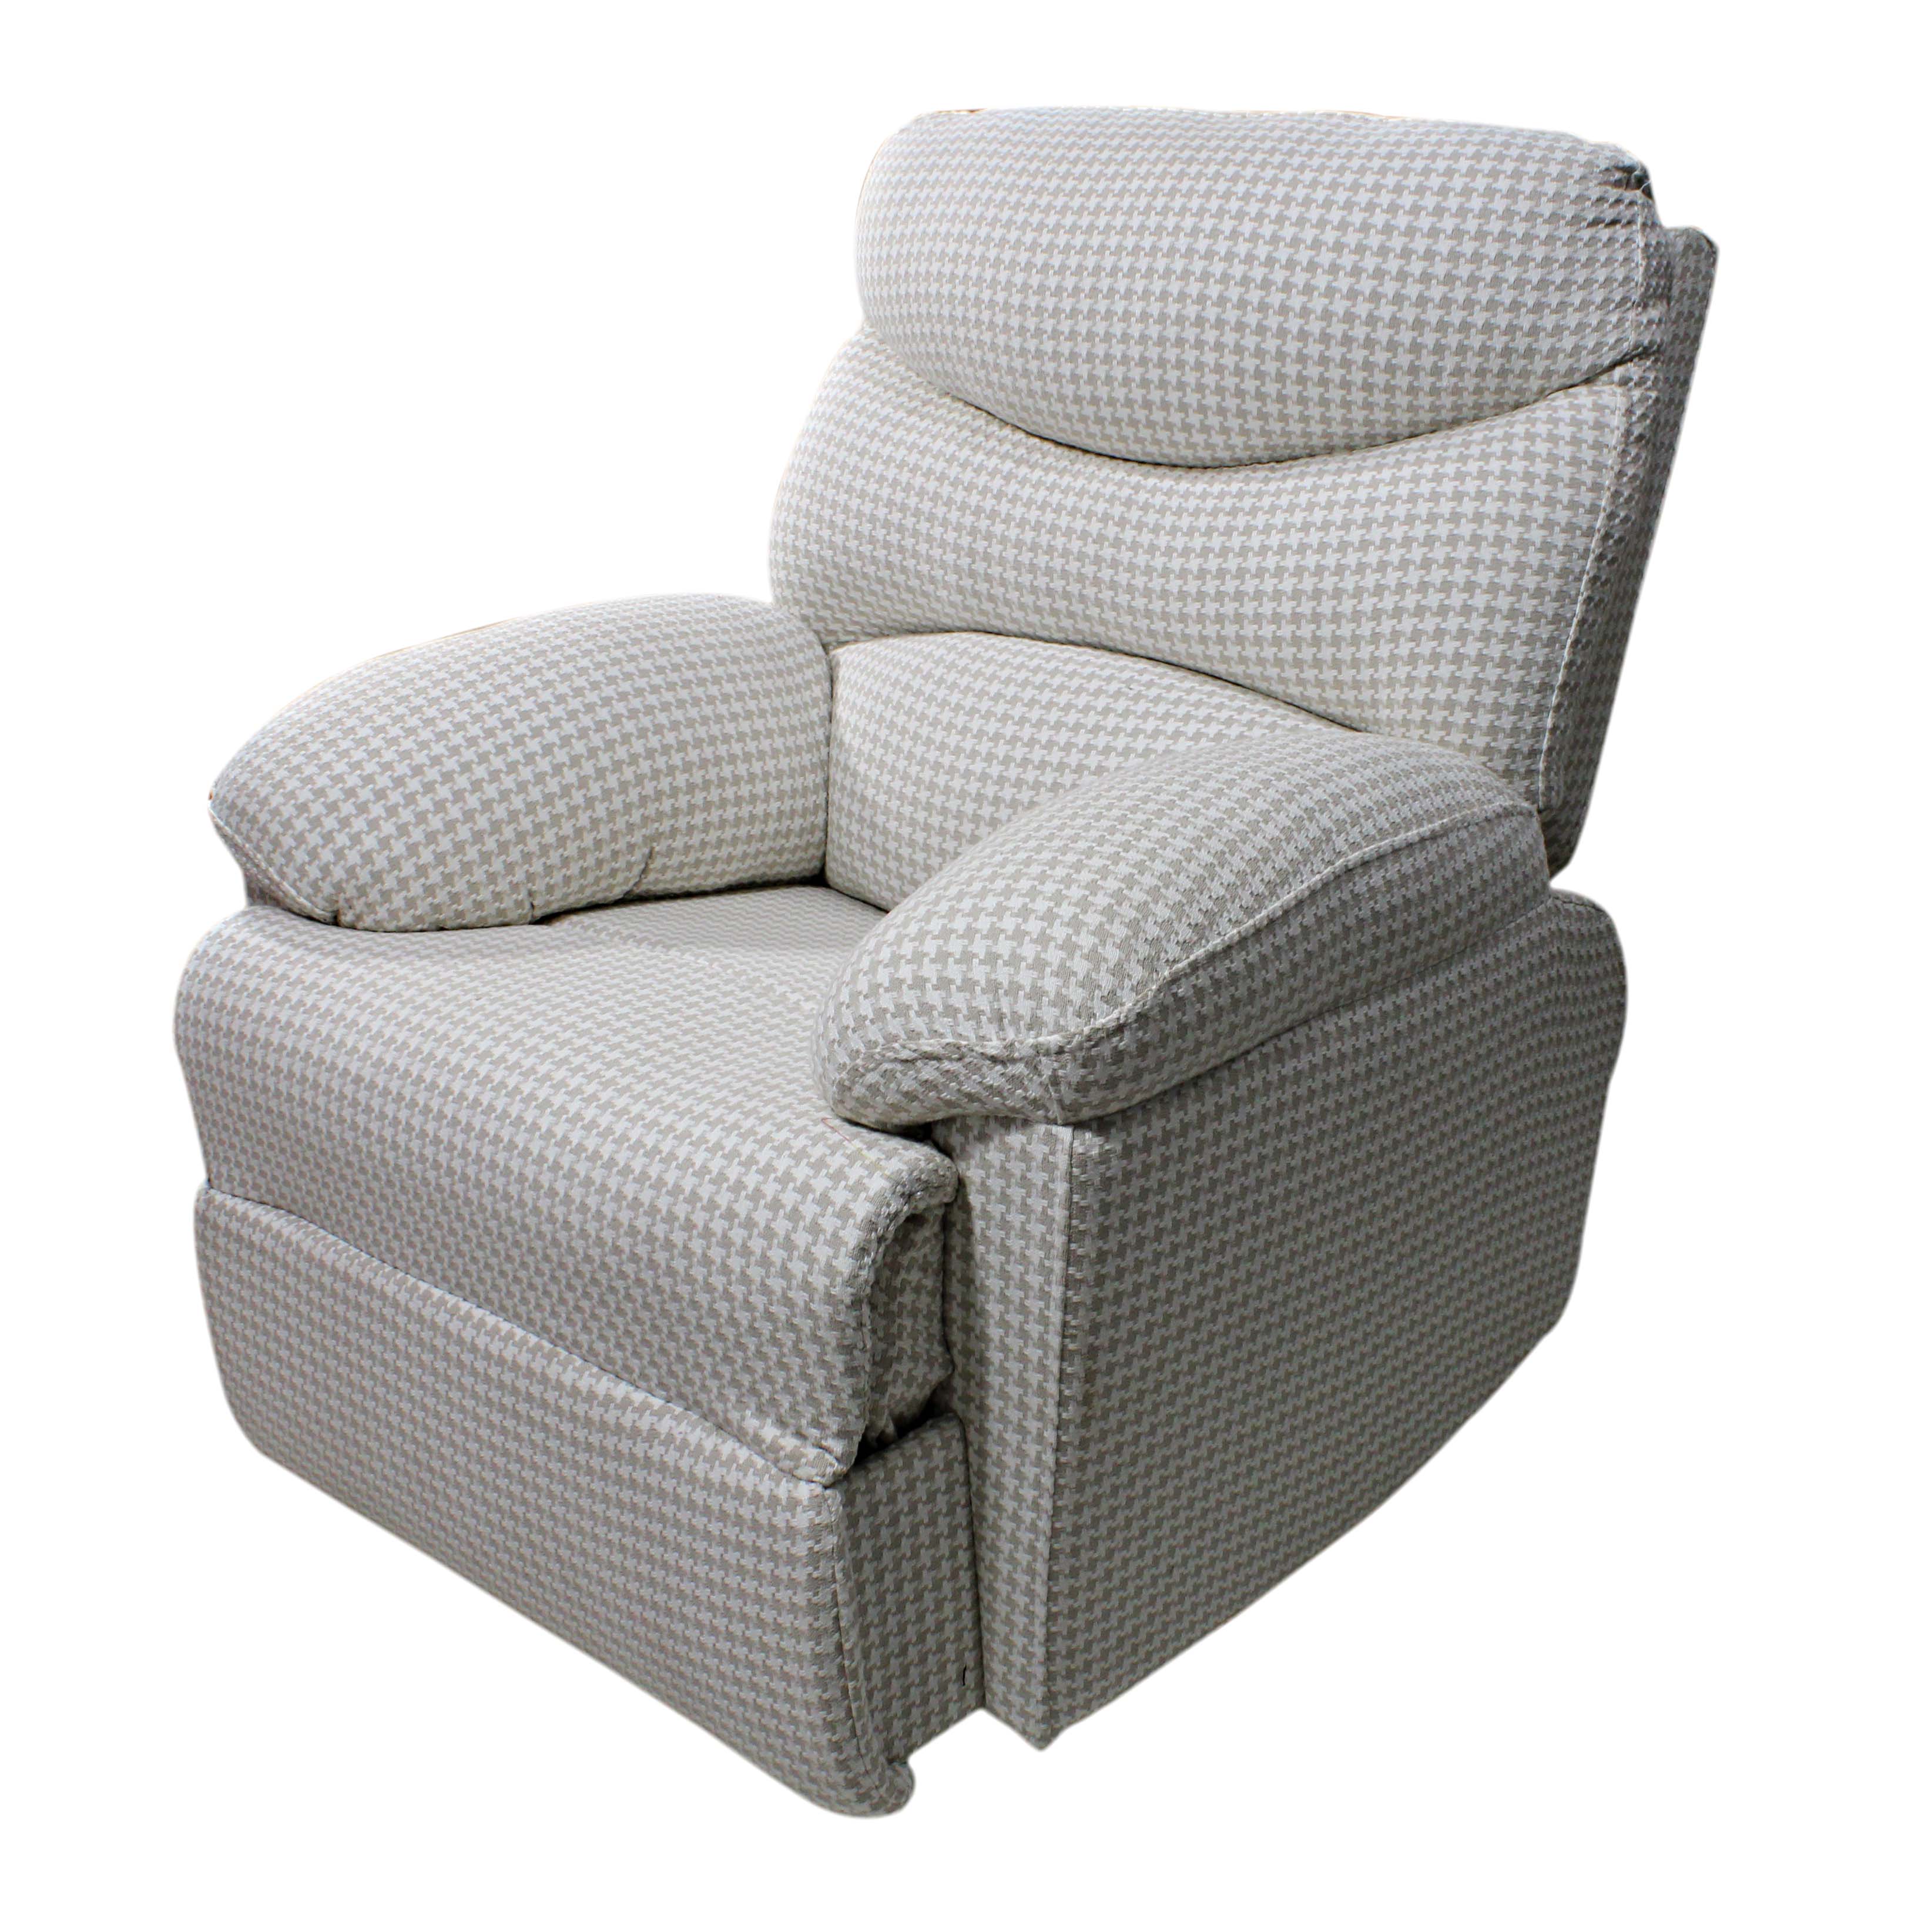 PRIMROSE Houston 3R Rocking And Revolving Recliner With Cotton Fabric - Grey